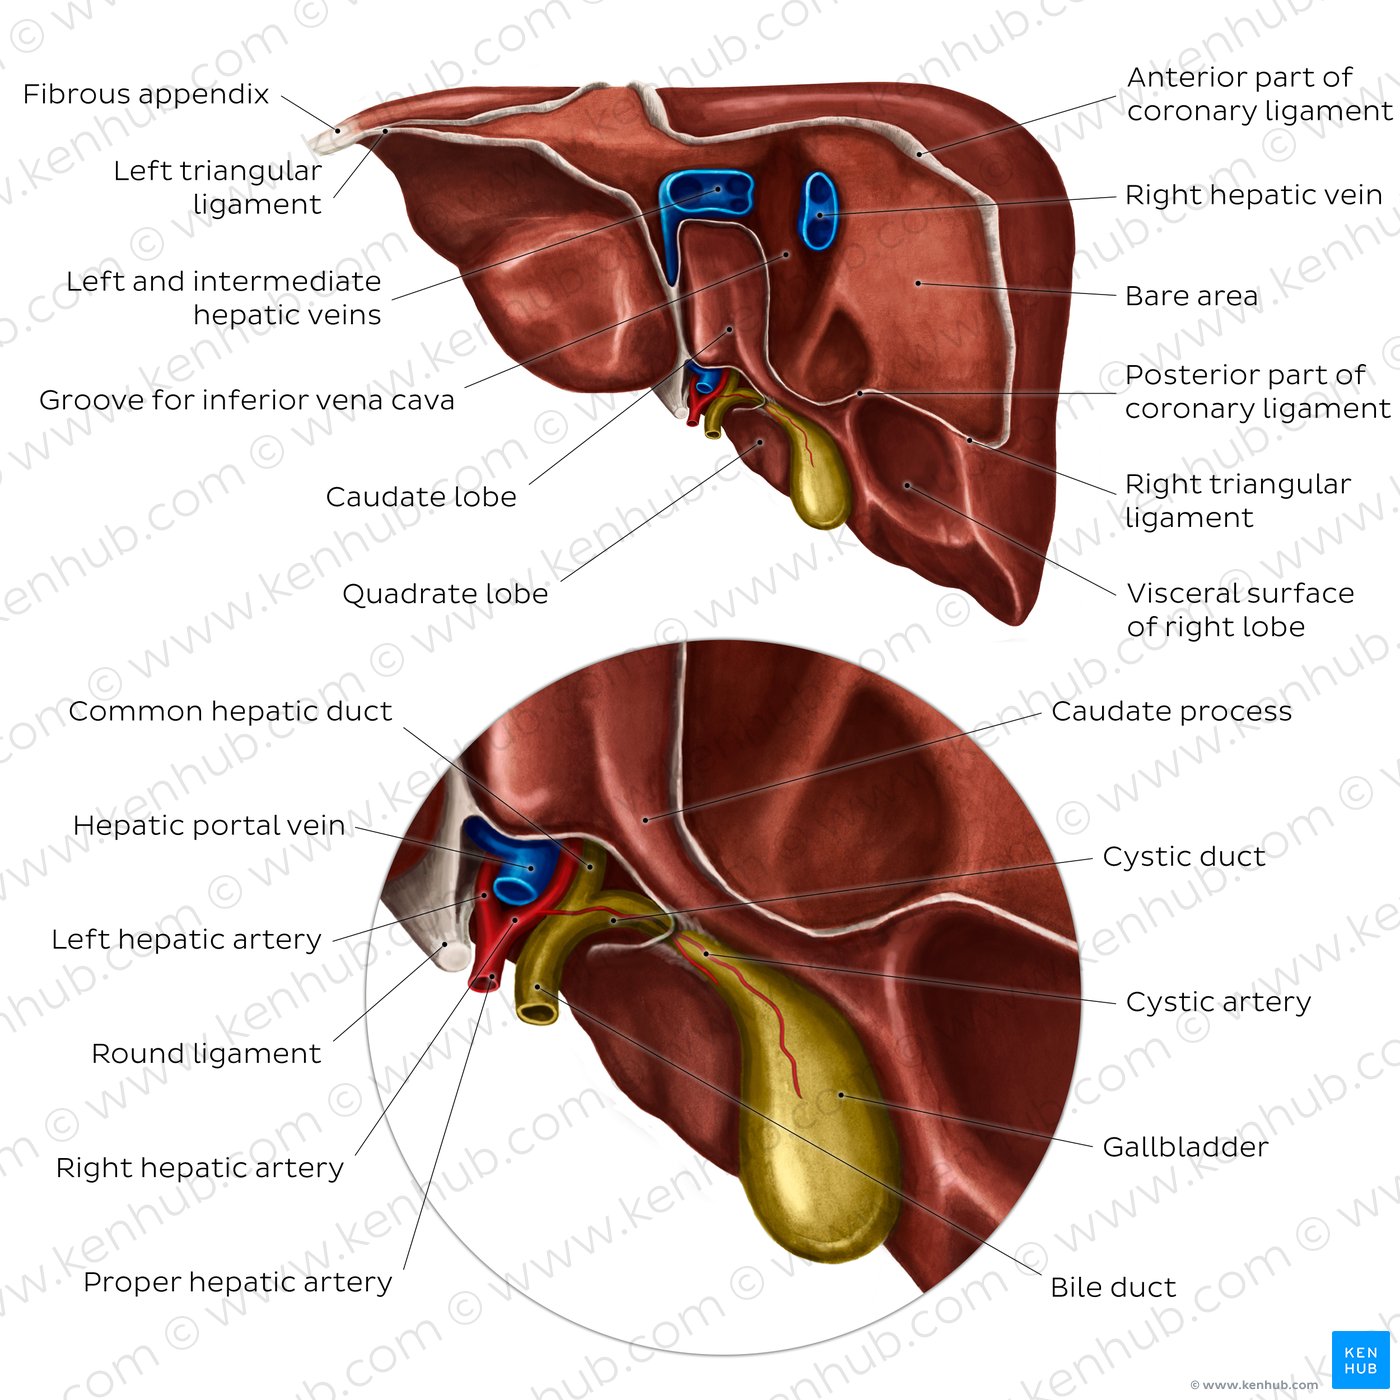 Posterior view of the liver